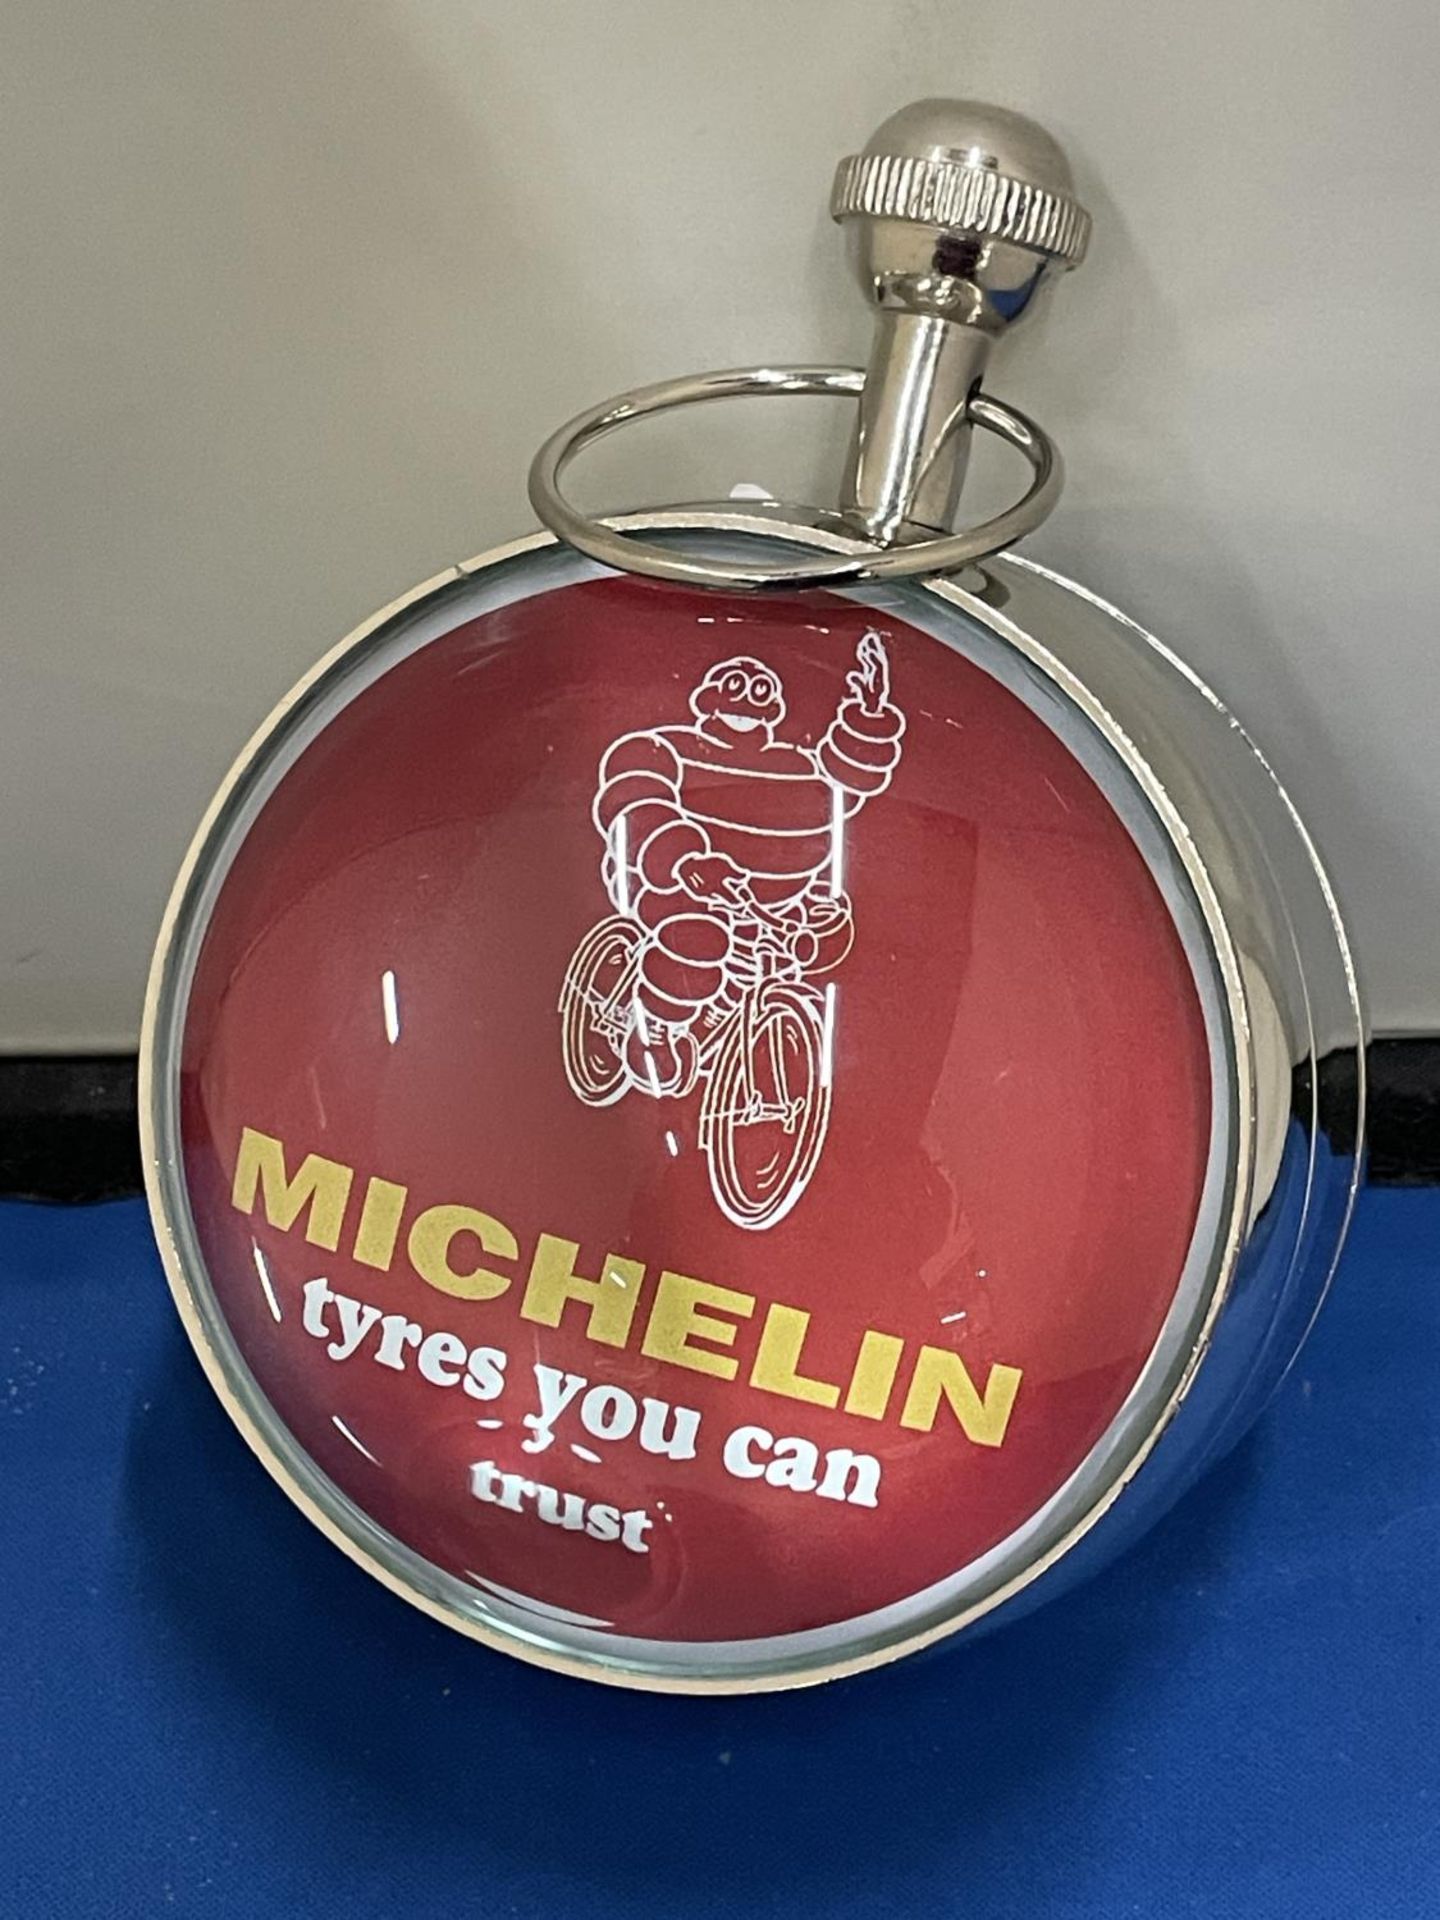 A LARGE GLASS BUBBLE CLOCK (MICHELIN) - Image 2 of 3